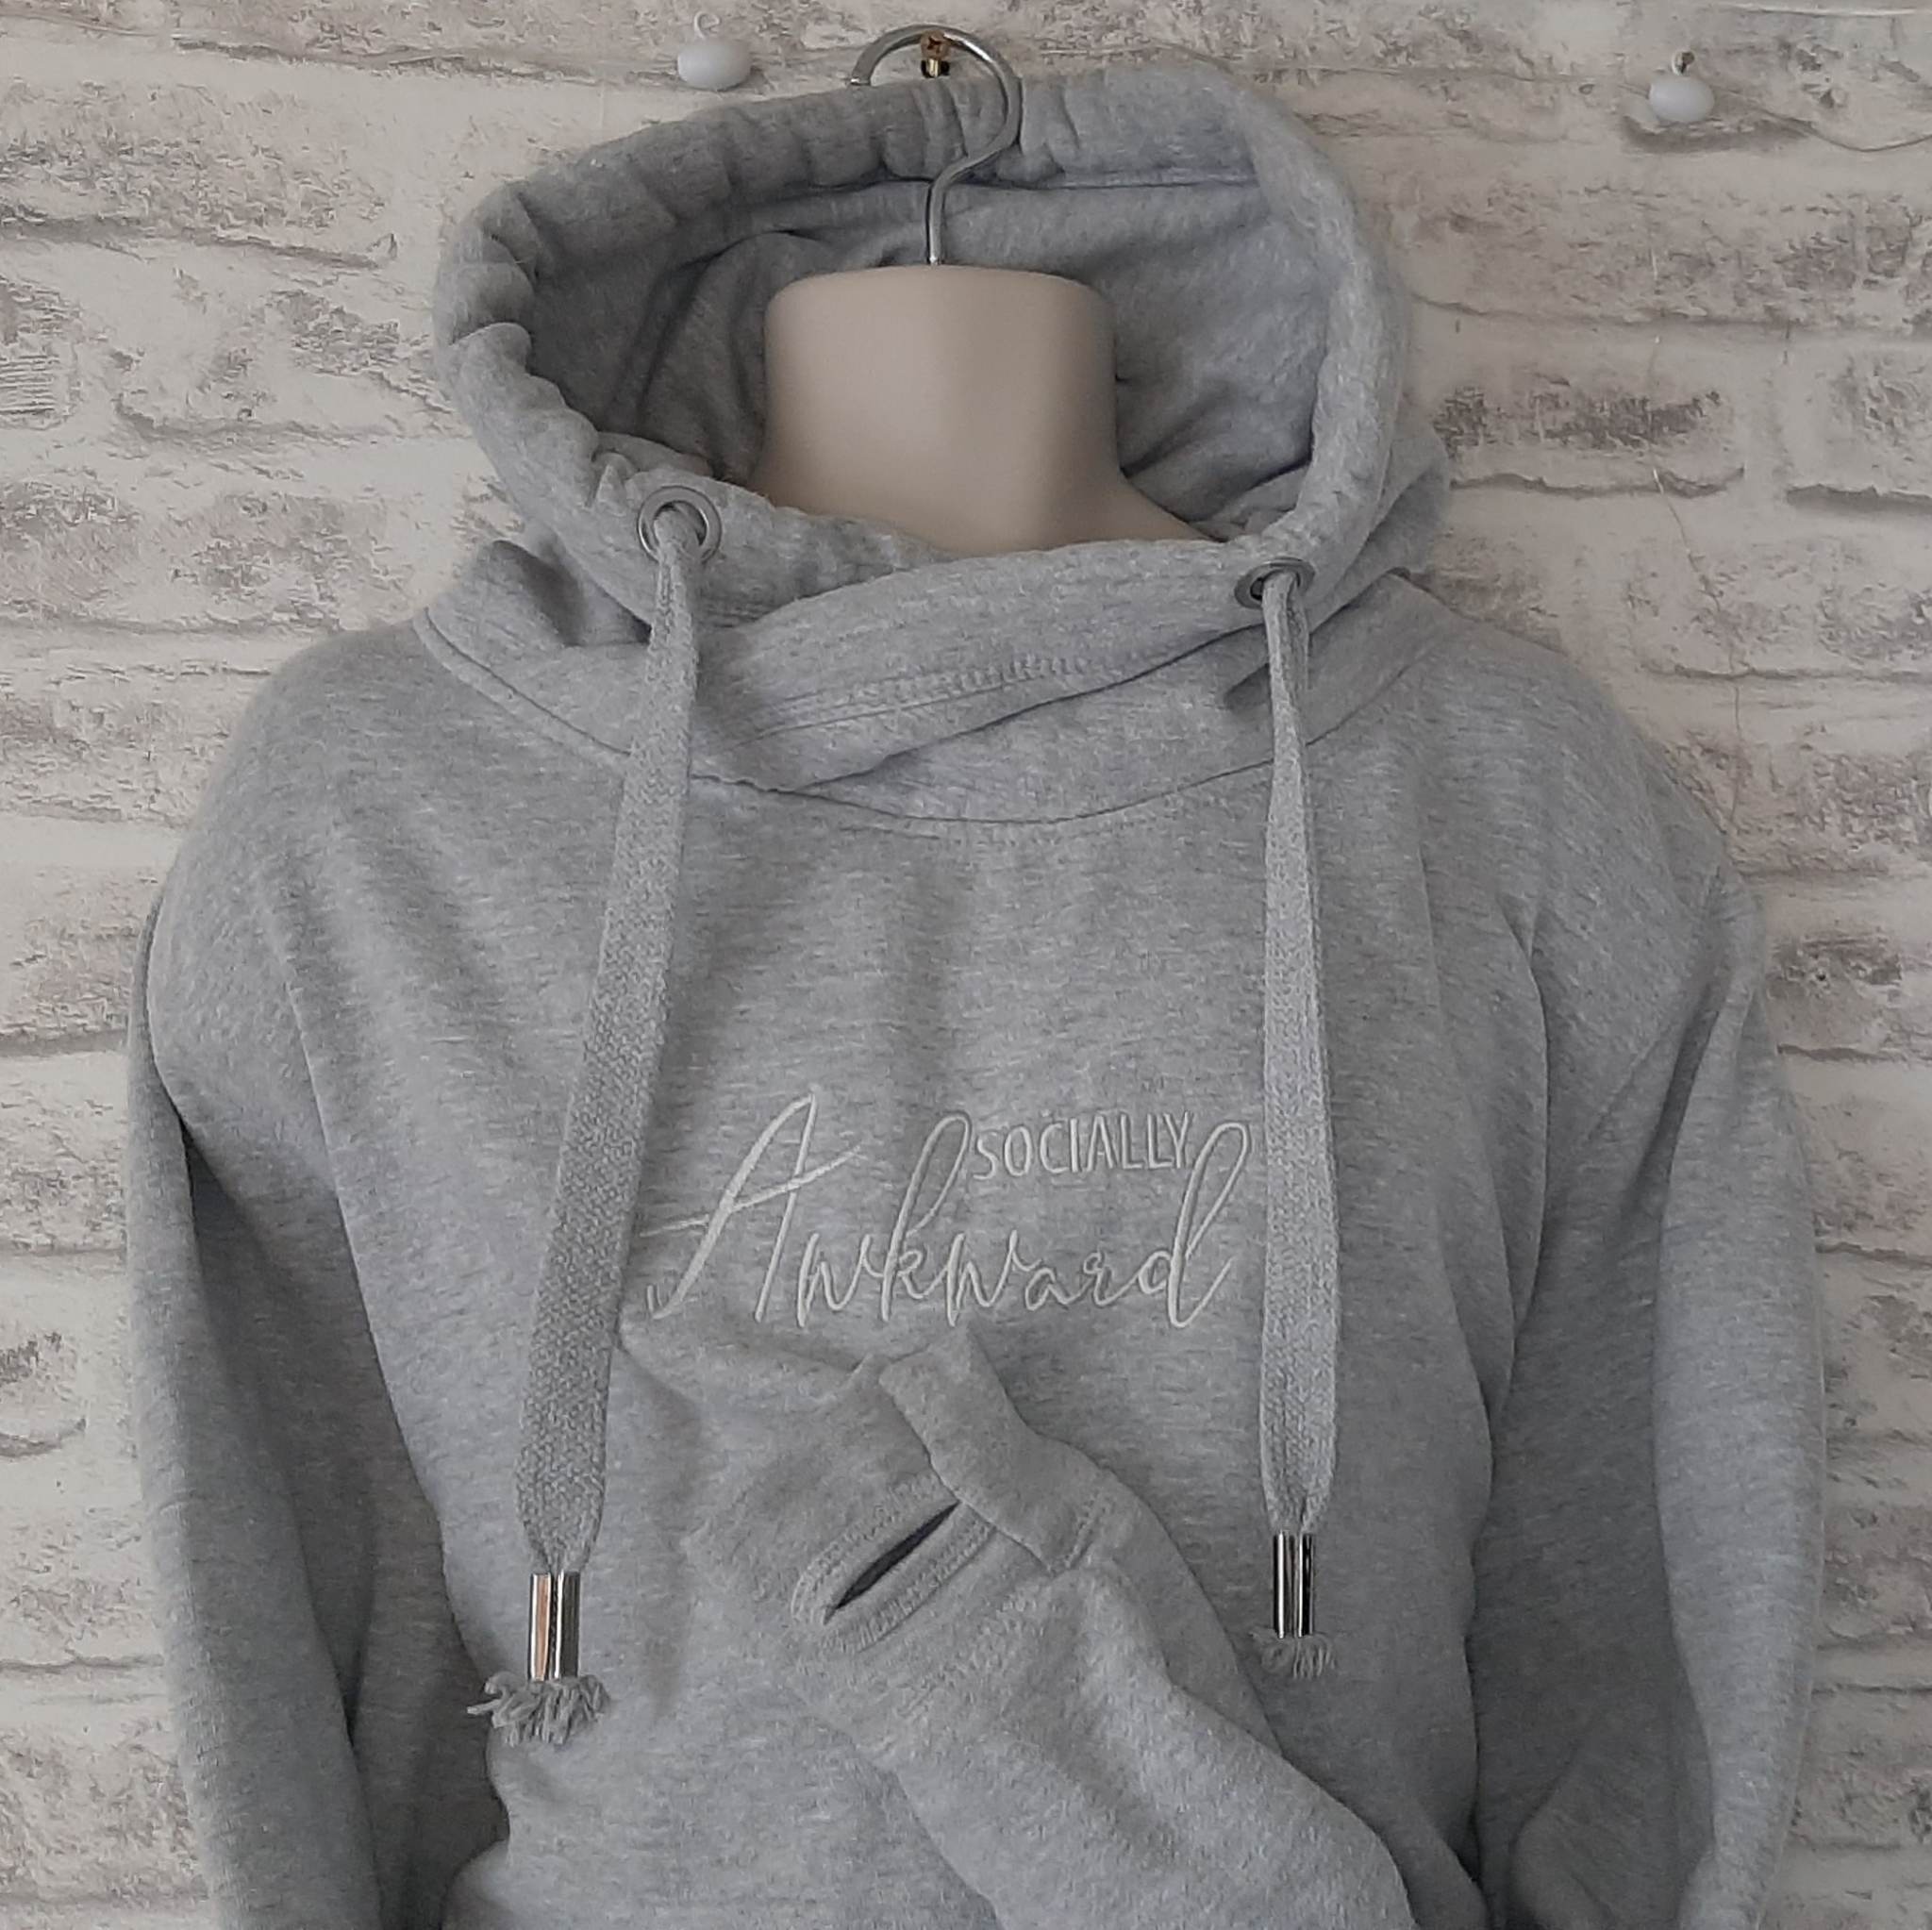 Crossover Neck Hoodie with Socially Awkward Slogan